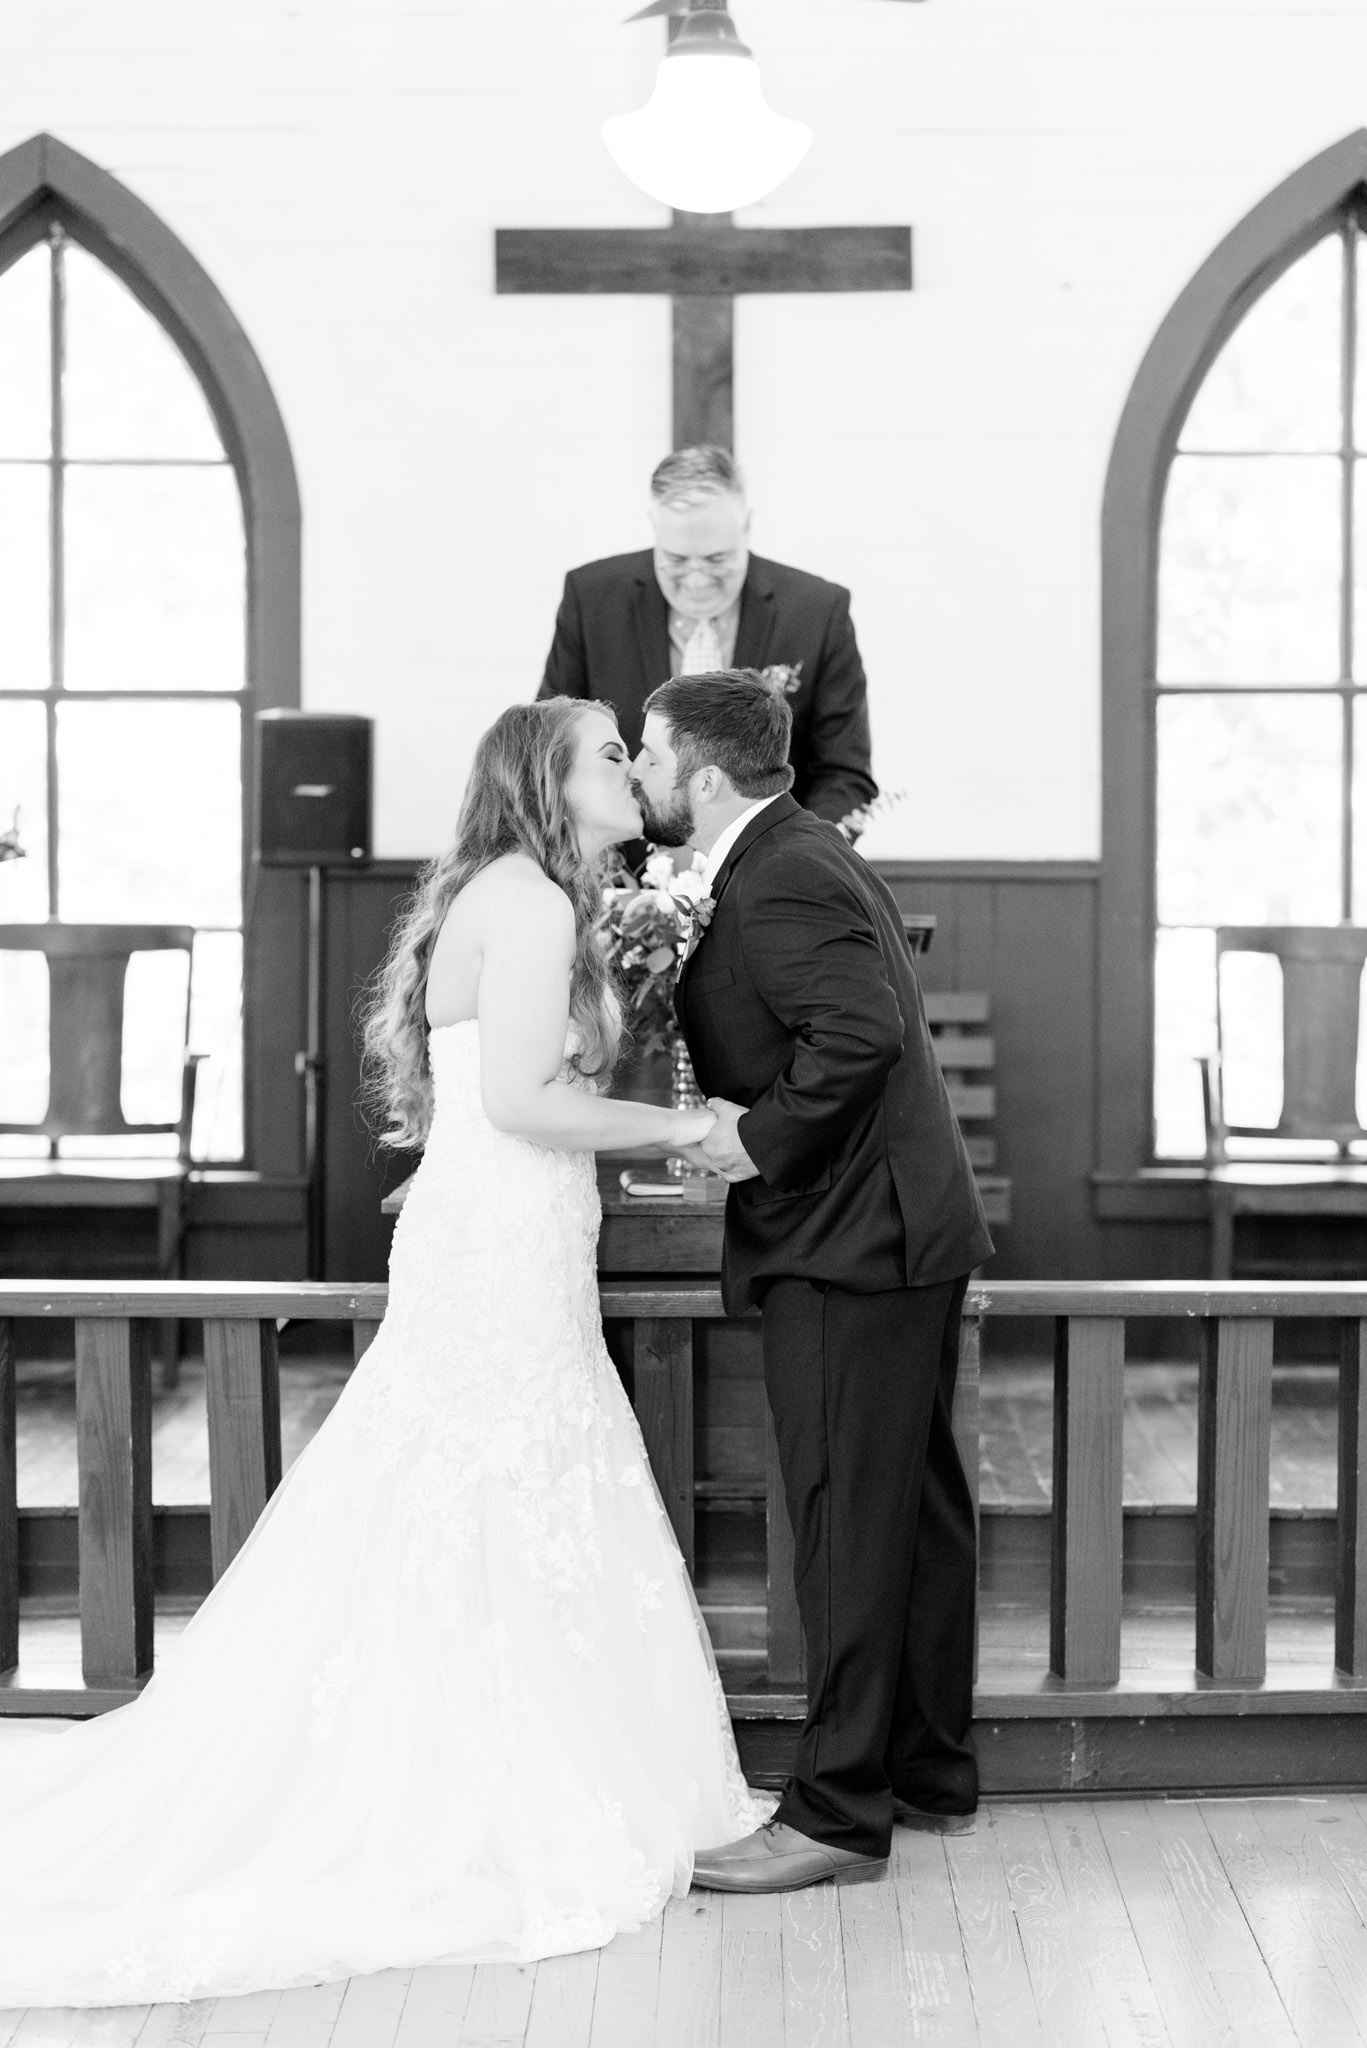 Bride and groom kiss during ceremony.